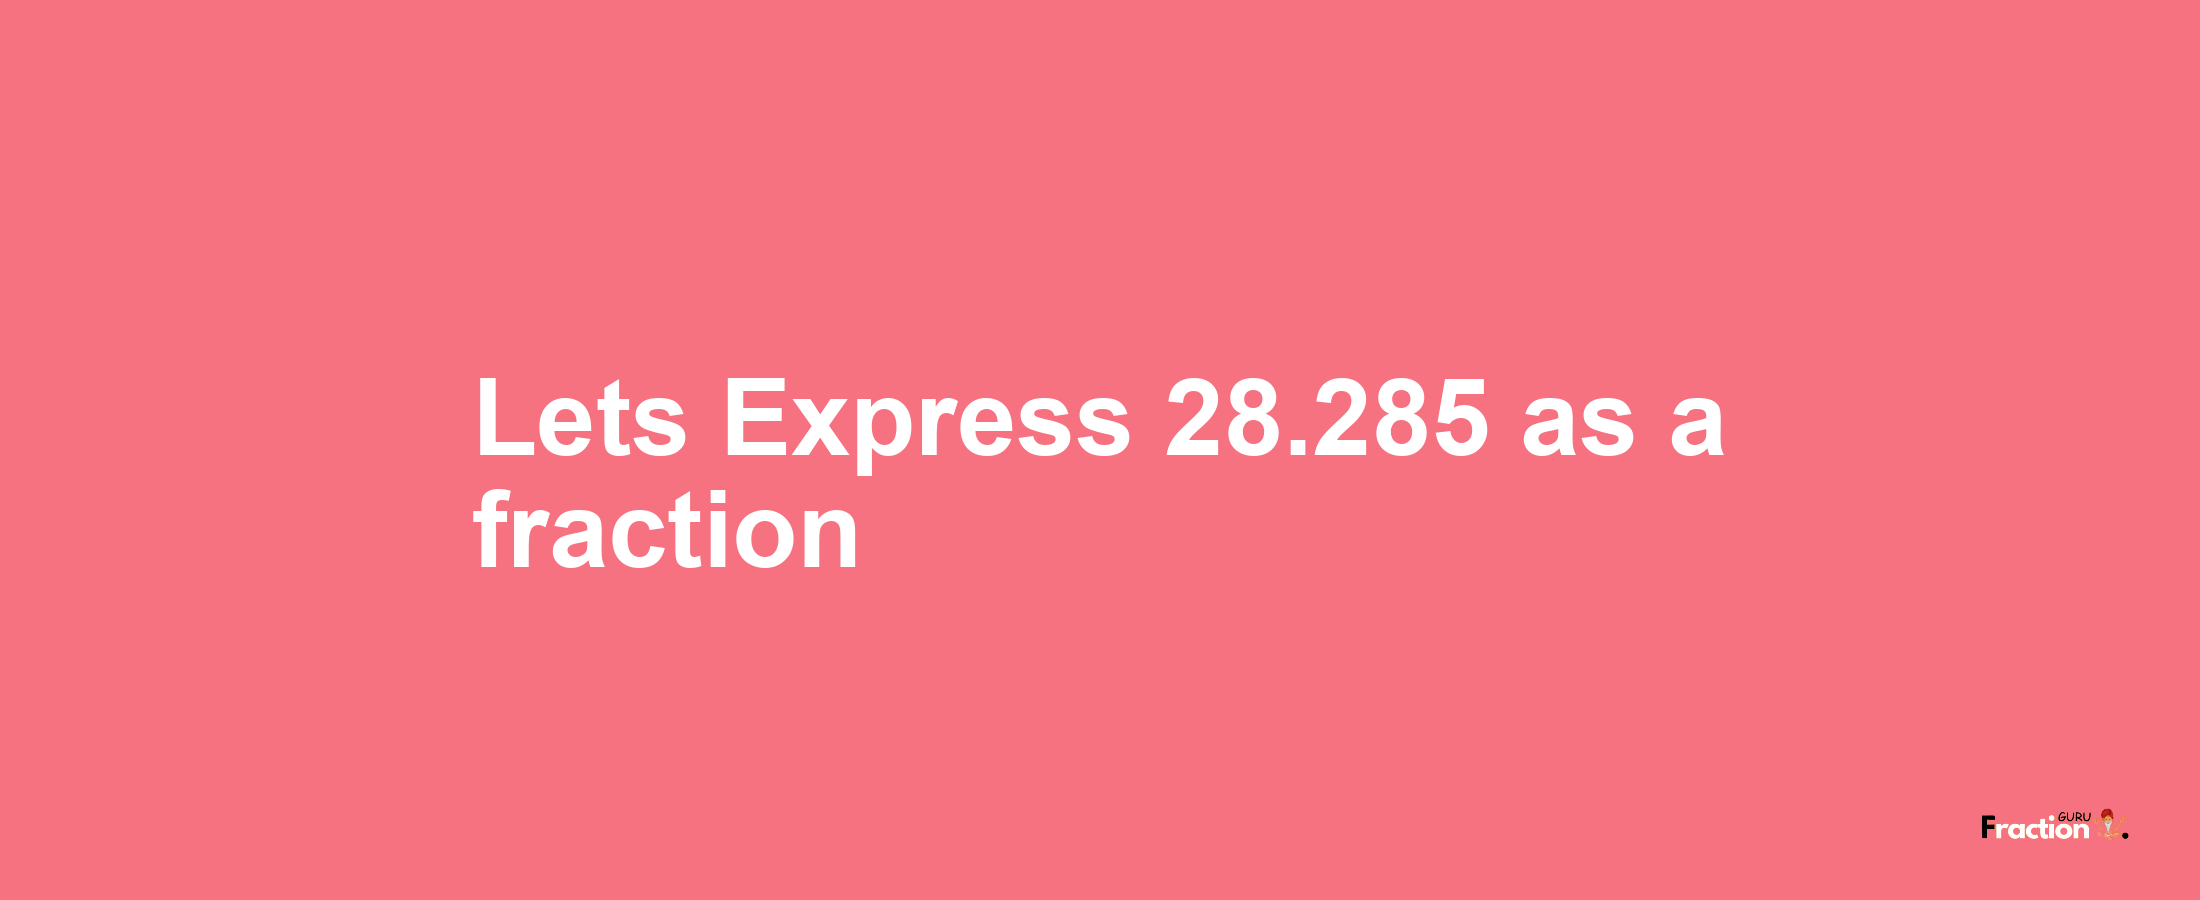 Lets Express 28.285 as afraction